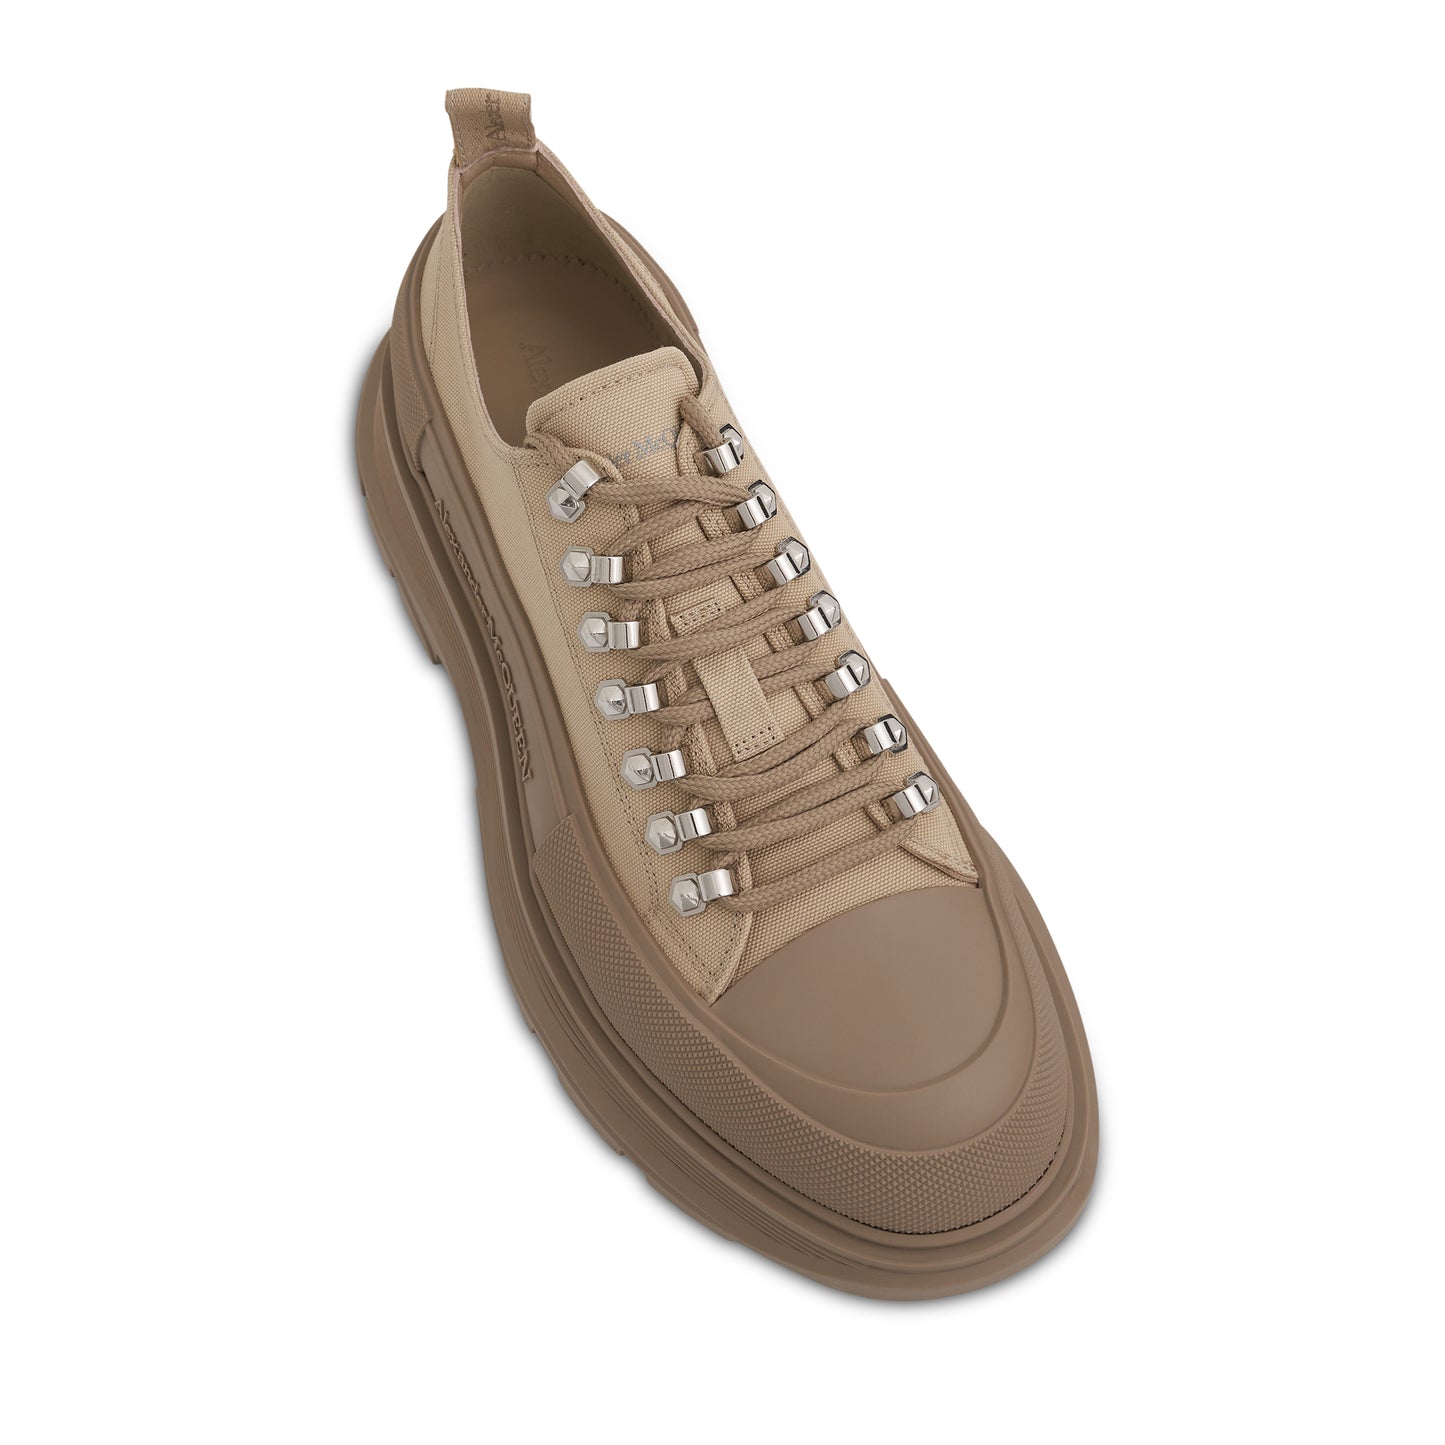 Tread Slick Lace Up Shoe in Sand/Stone